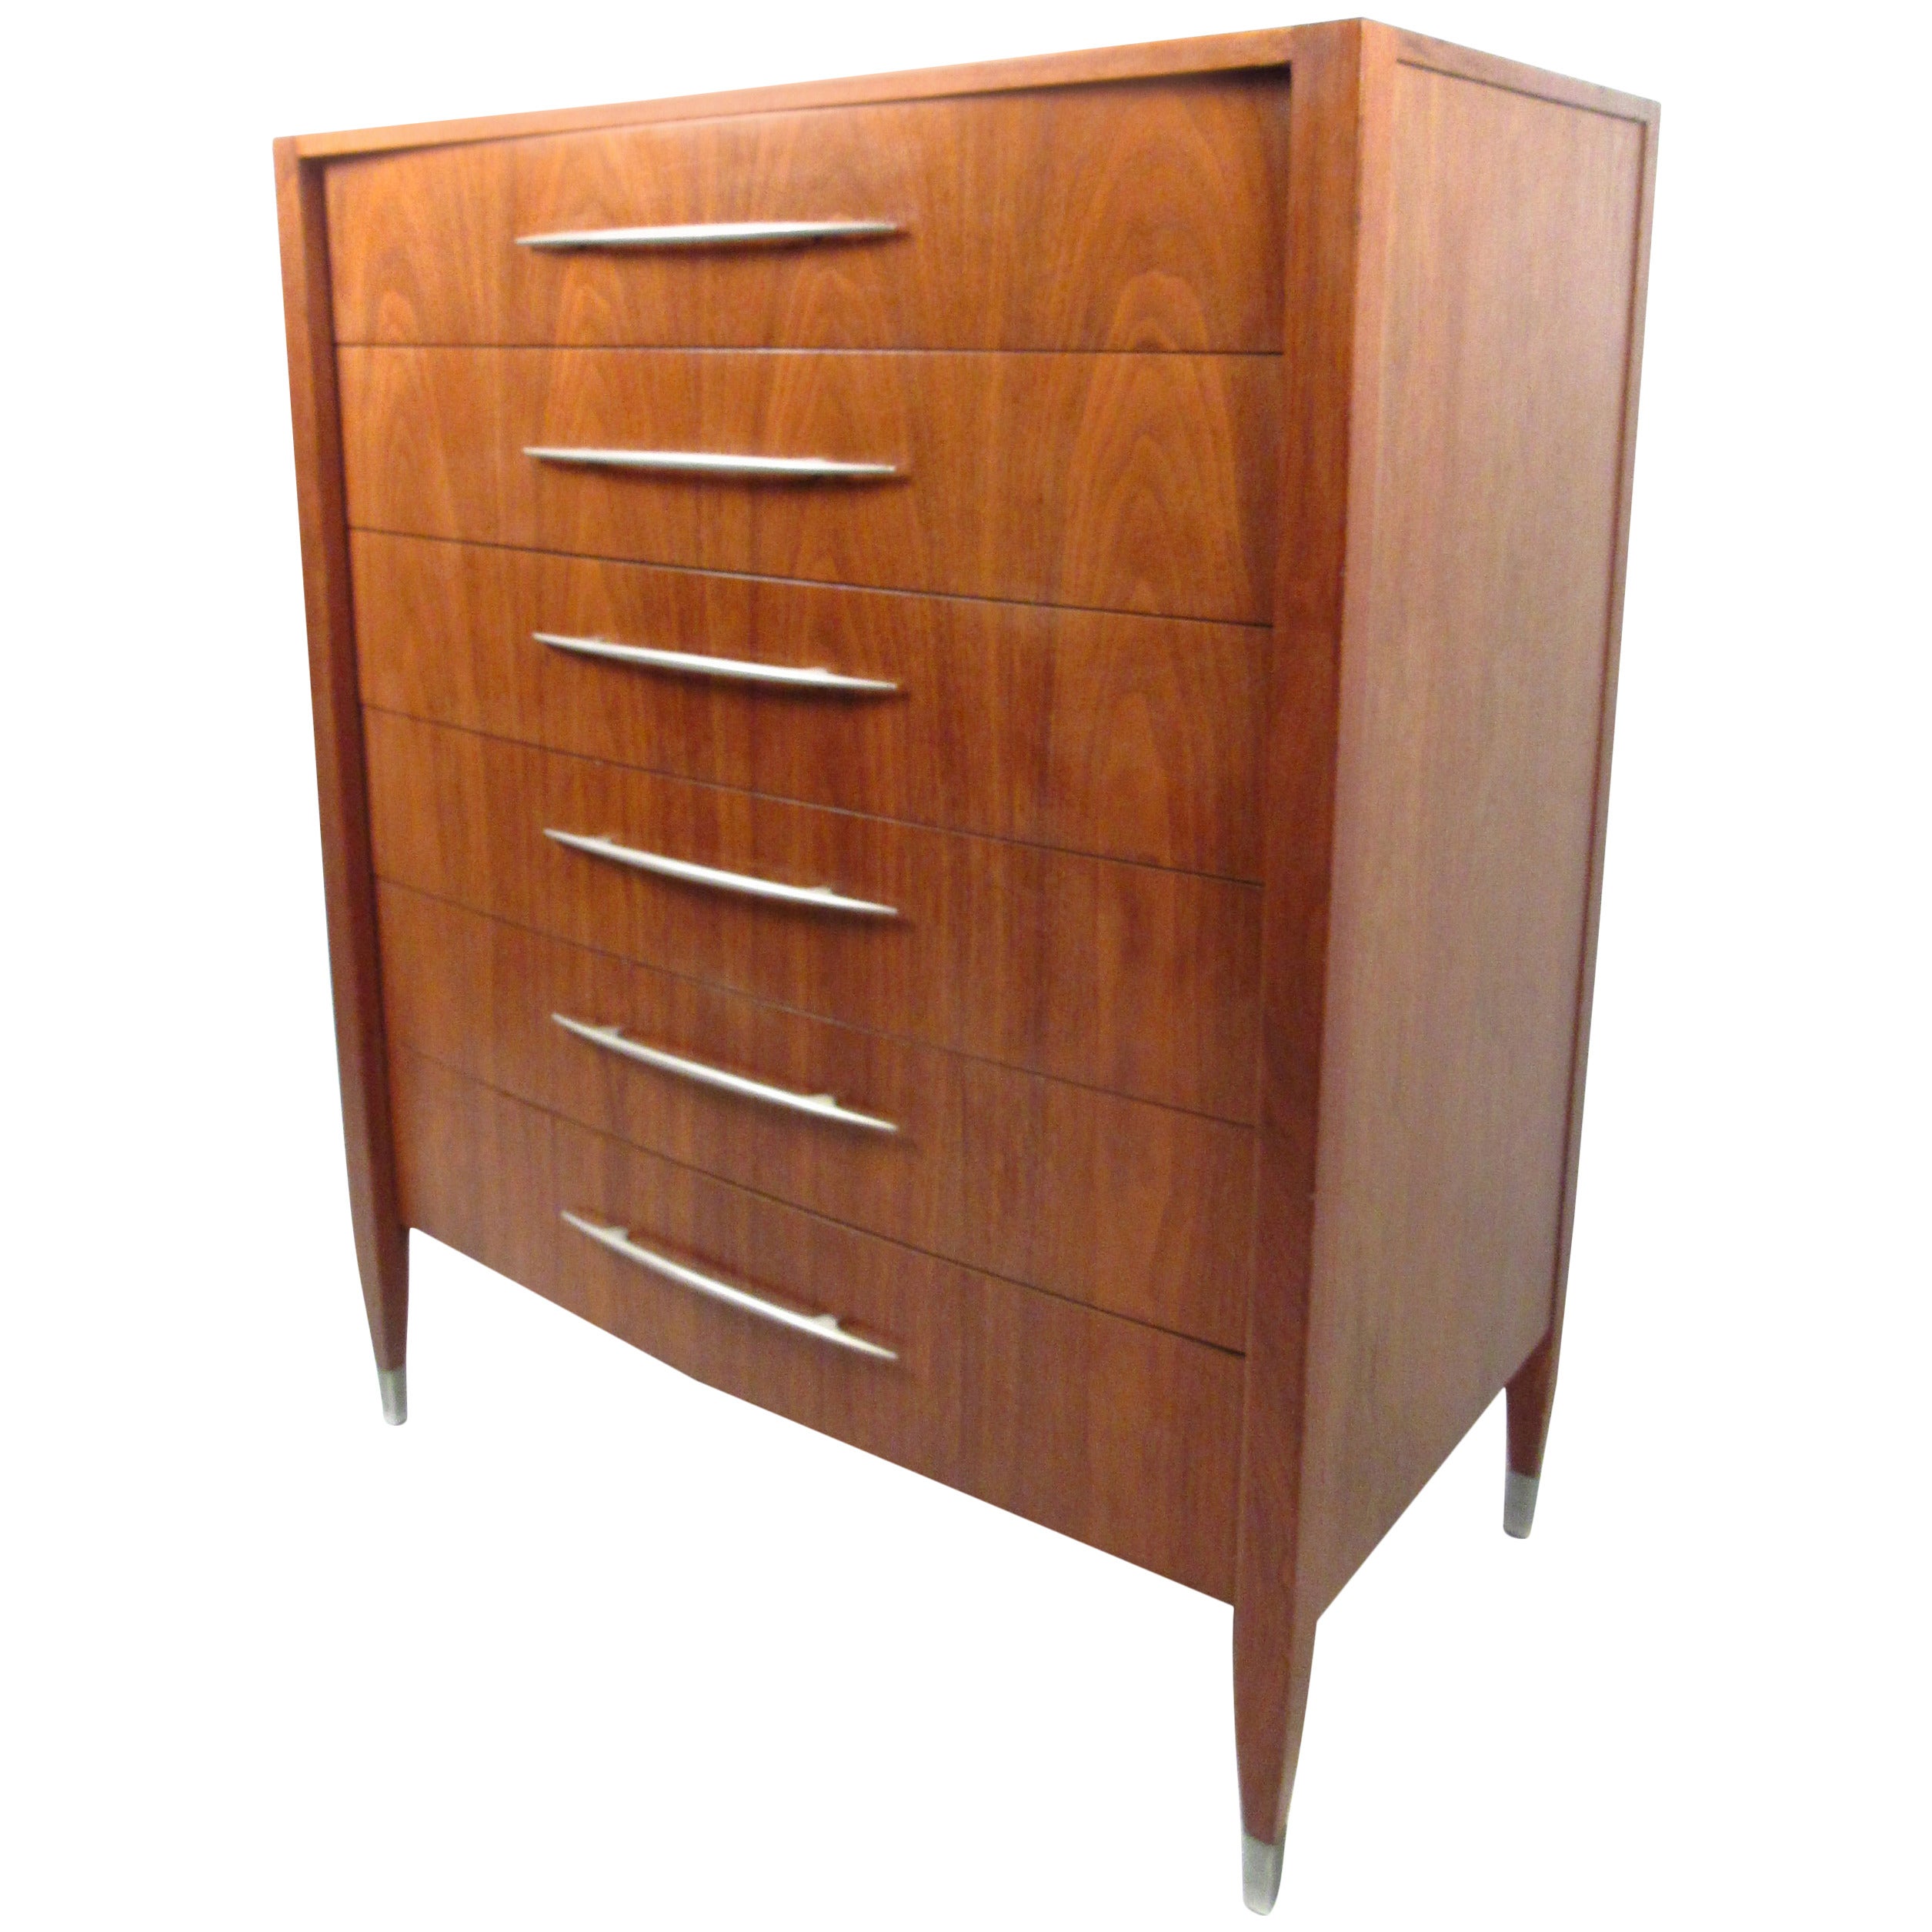 Vintage American Walnut Dresser with Chrome Accenting by Sligh Furniture For Sale